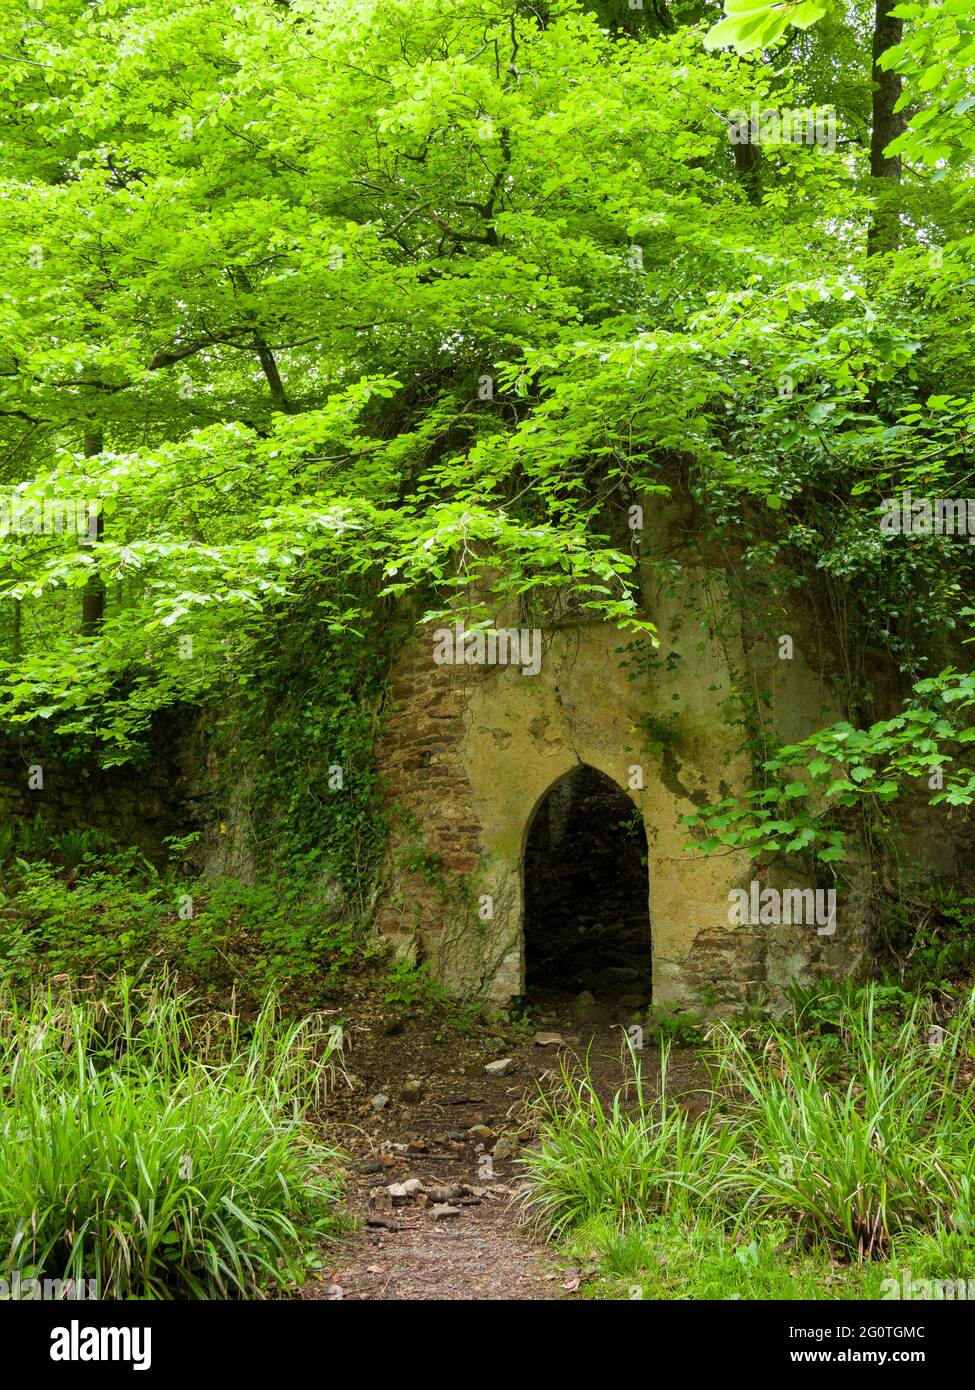 The ruins of Mendip Lodge, the 18th century country retreat of the Reverend Thomas Sedgewick Whalley, in Mendip Lodge Wood in the Mendip Hills, Upper Langford, North Somerset, England. Stock Photo